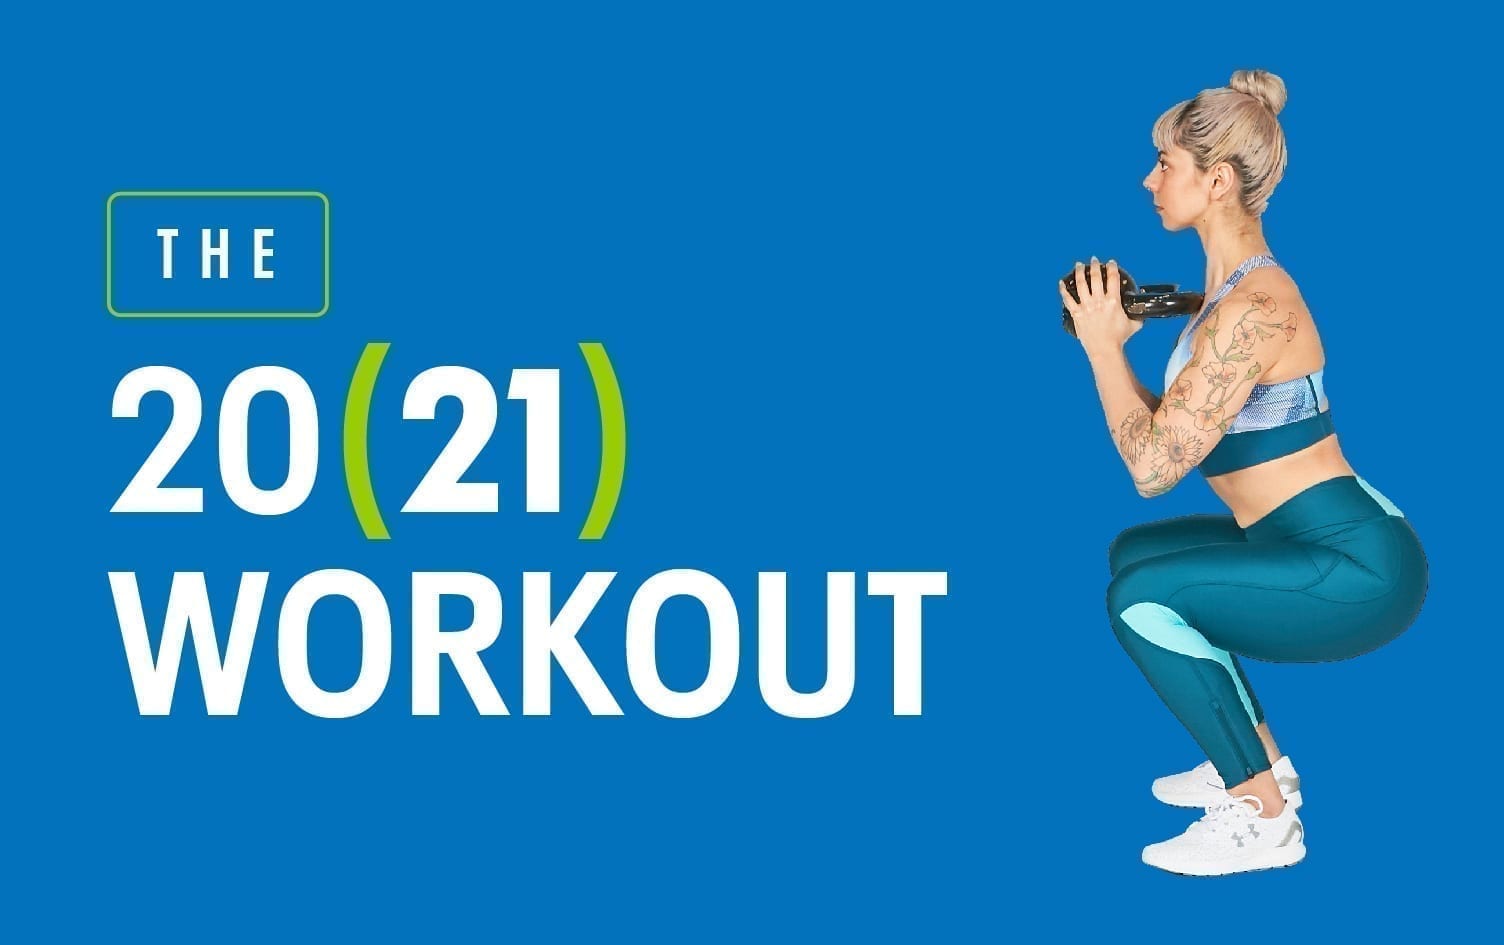 Your Total Body (20)21 New Year Workout Guide